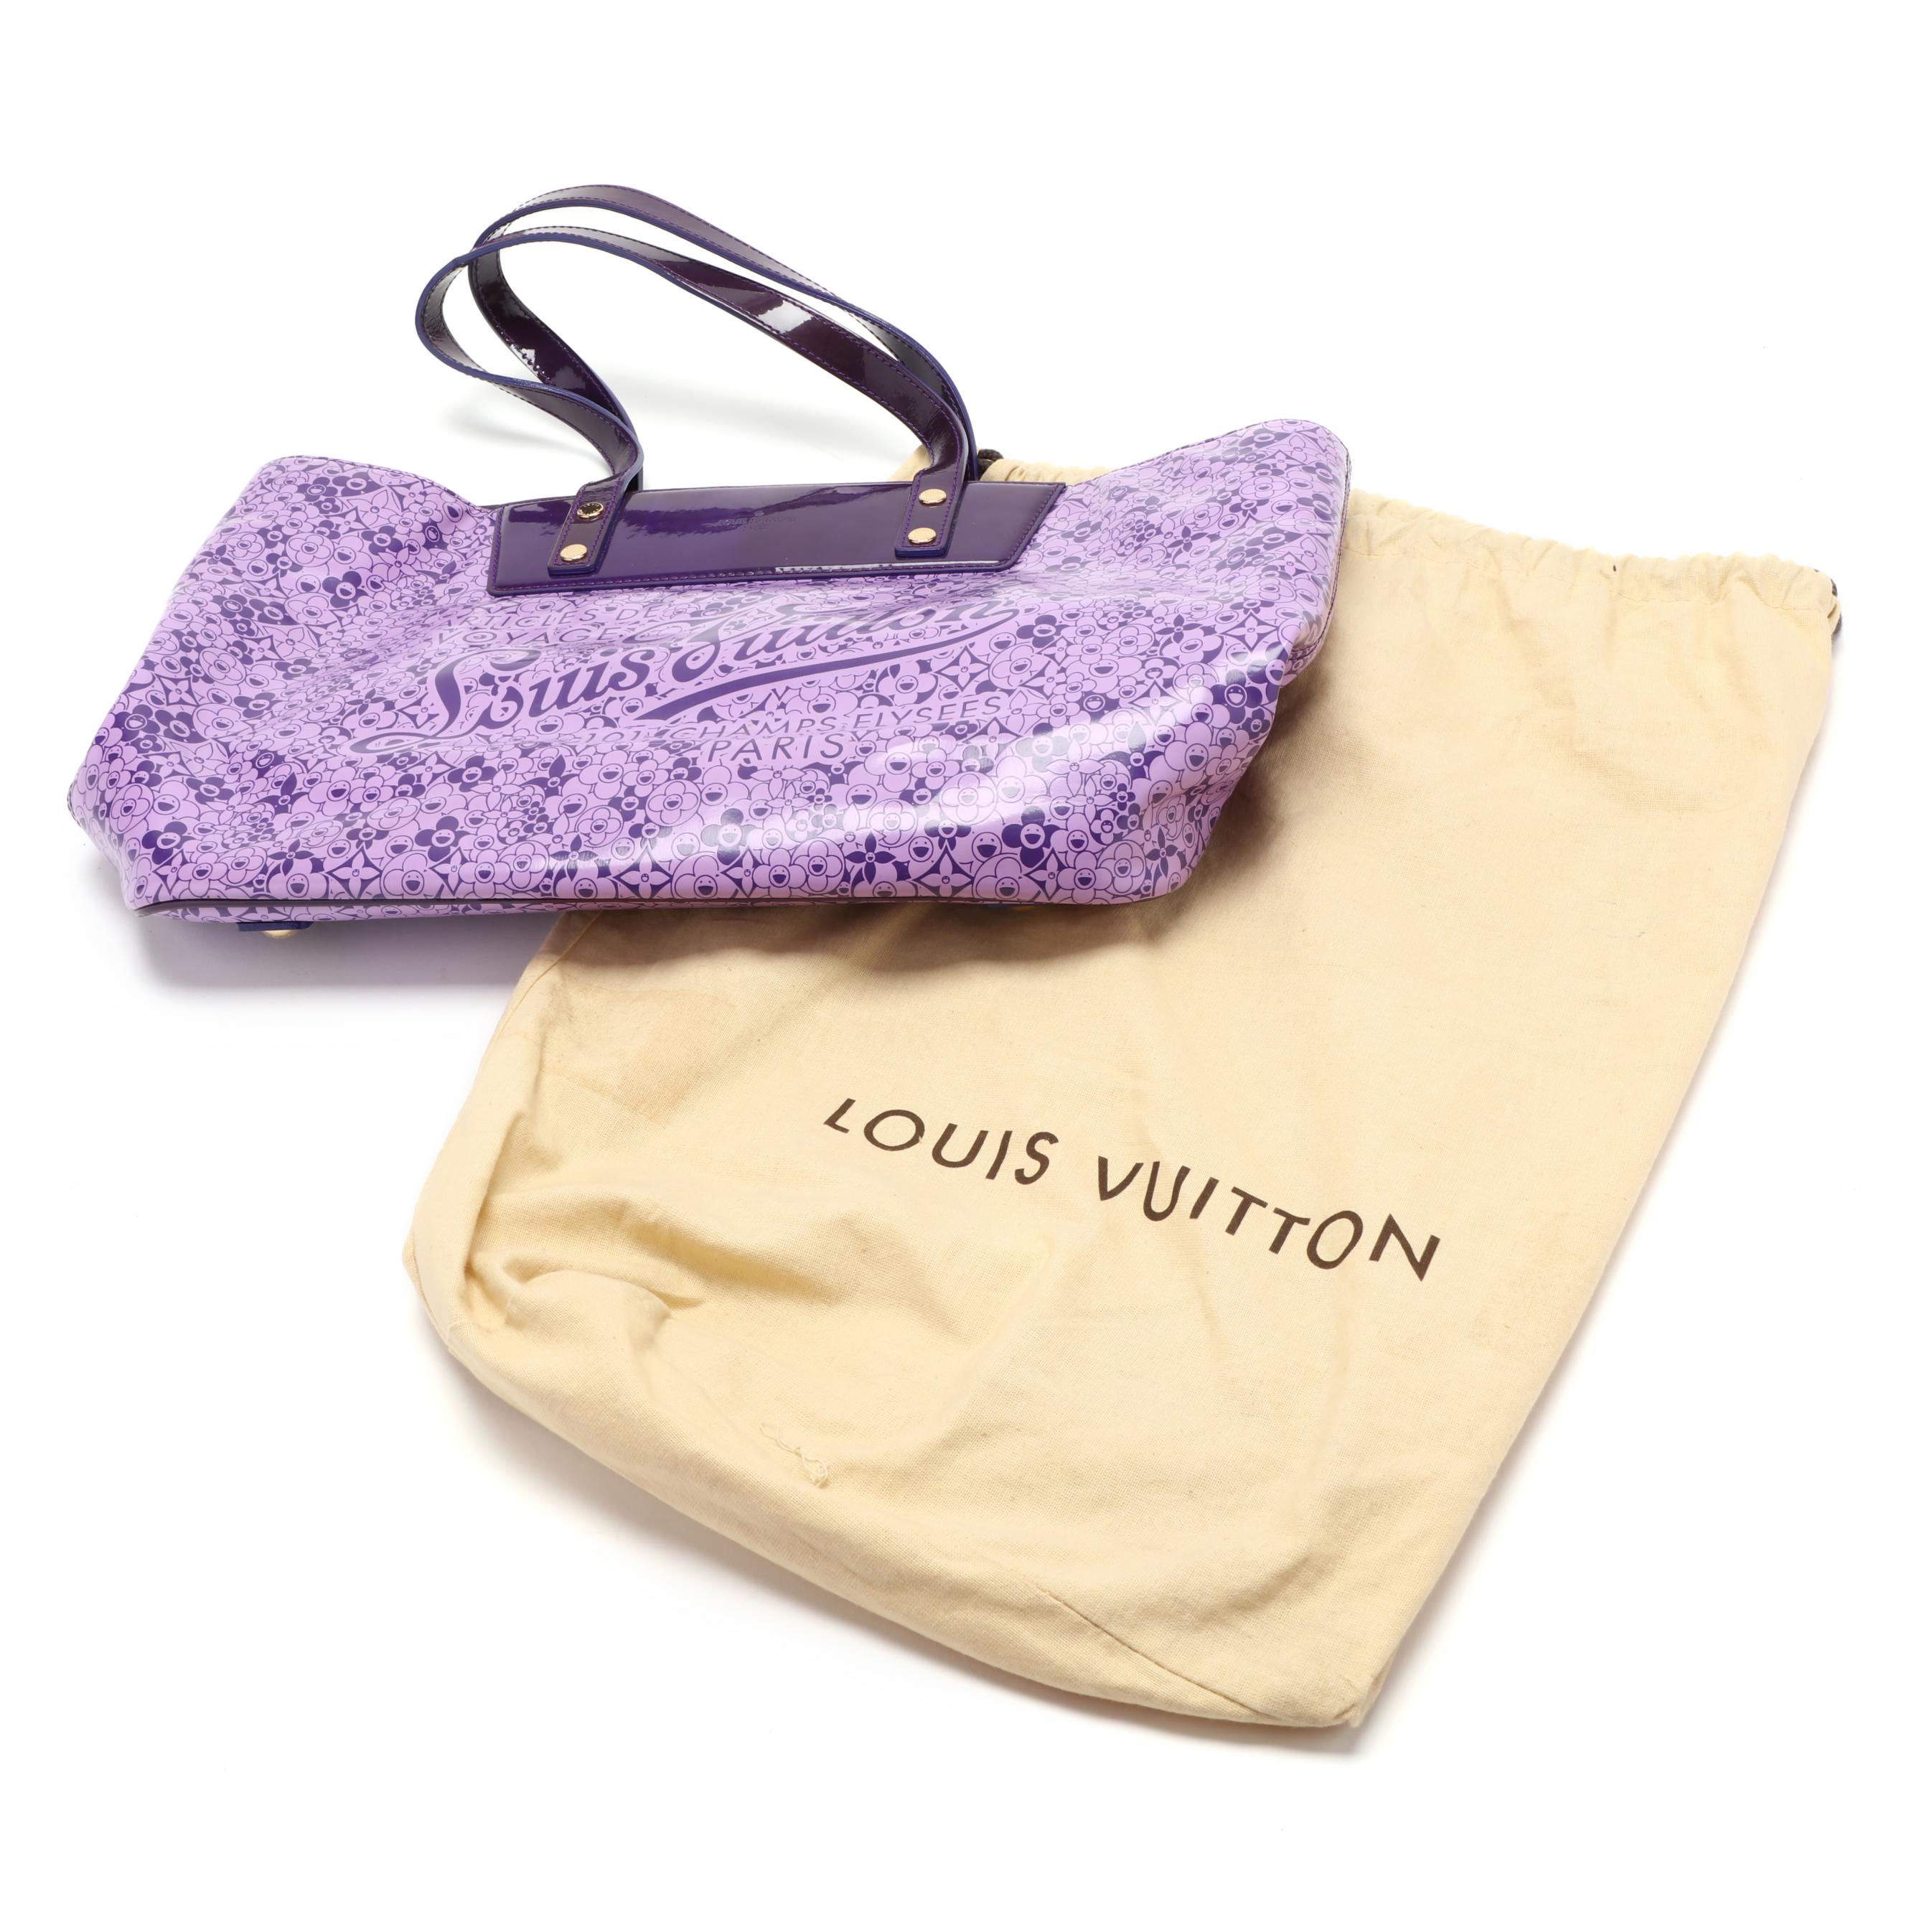 Cosmic Blossom Voyage Tote, Louis Vuitton (Lot 125 - The Signature